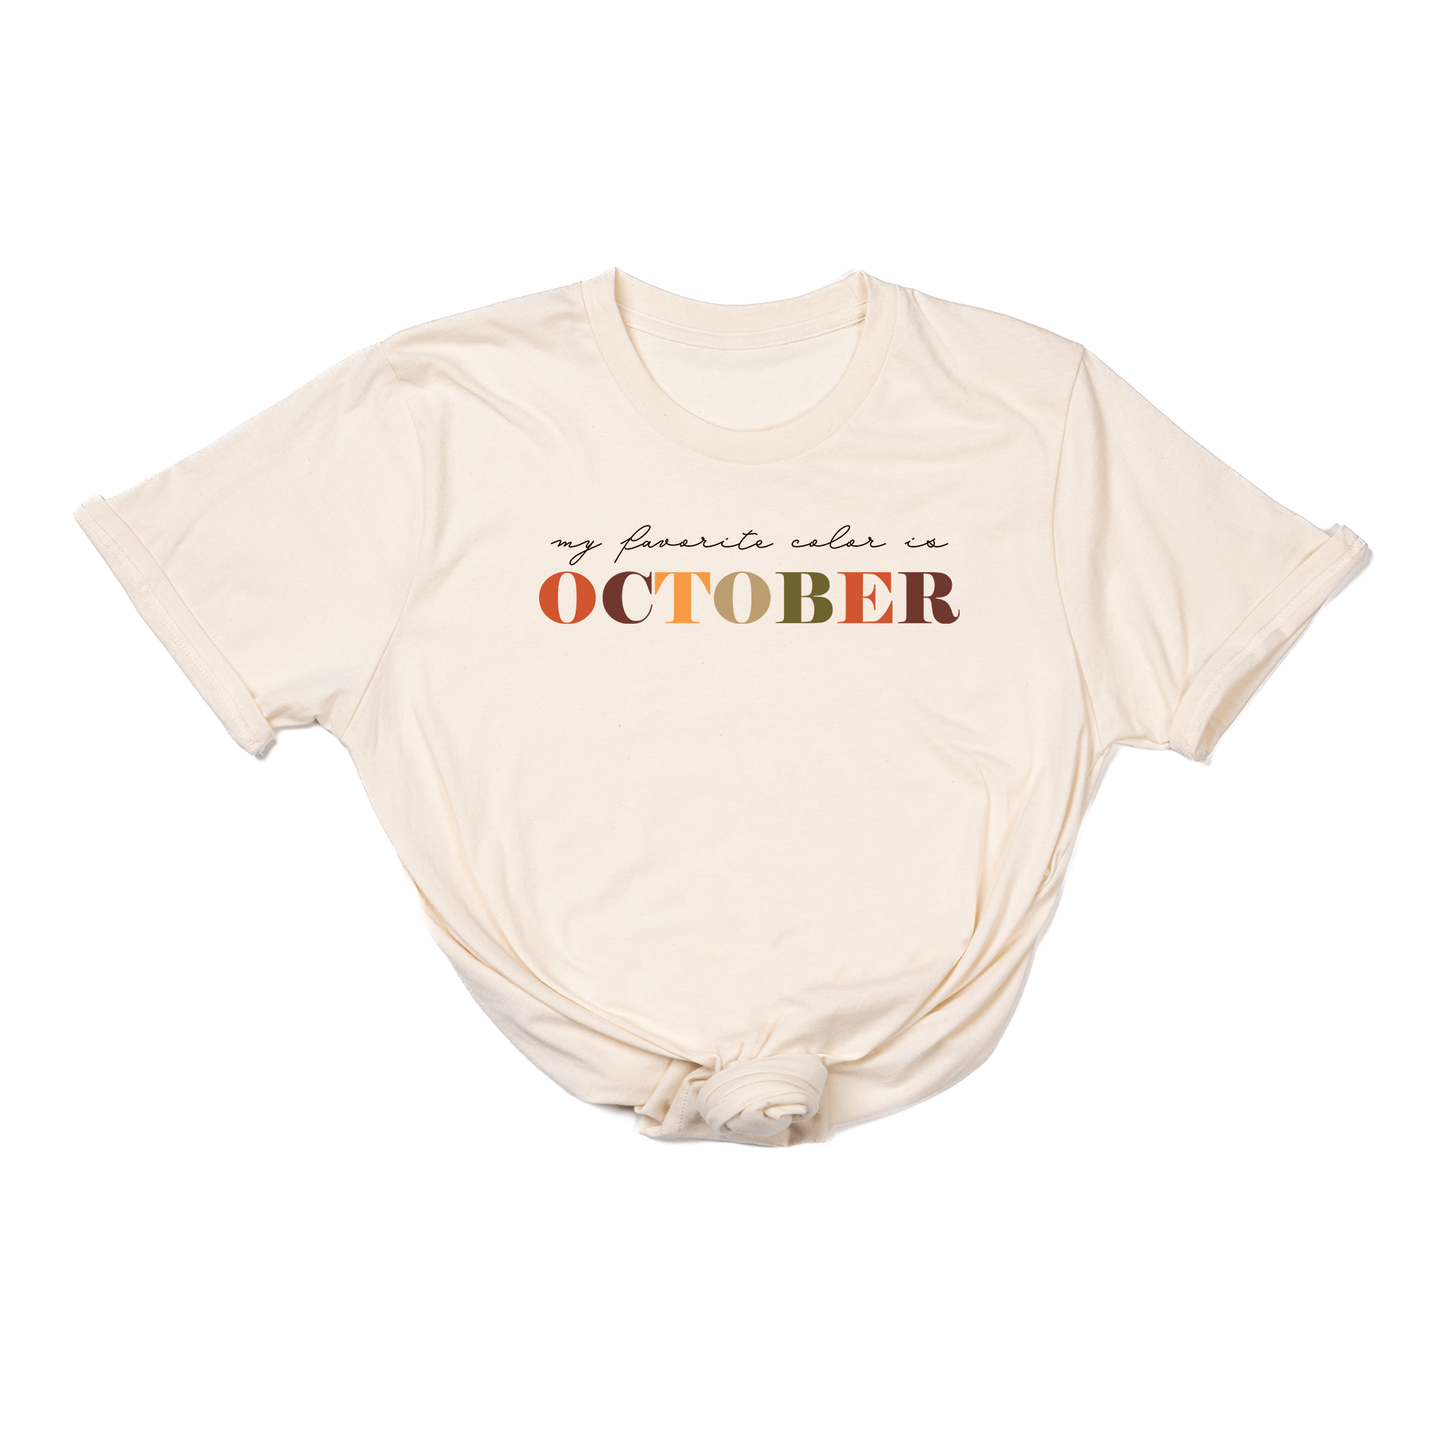 My Favorite Color is October - Tee (Natural)